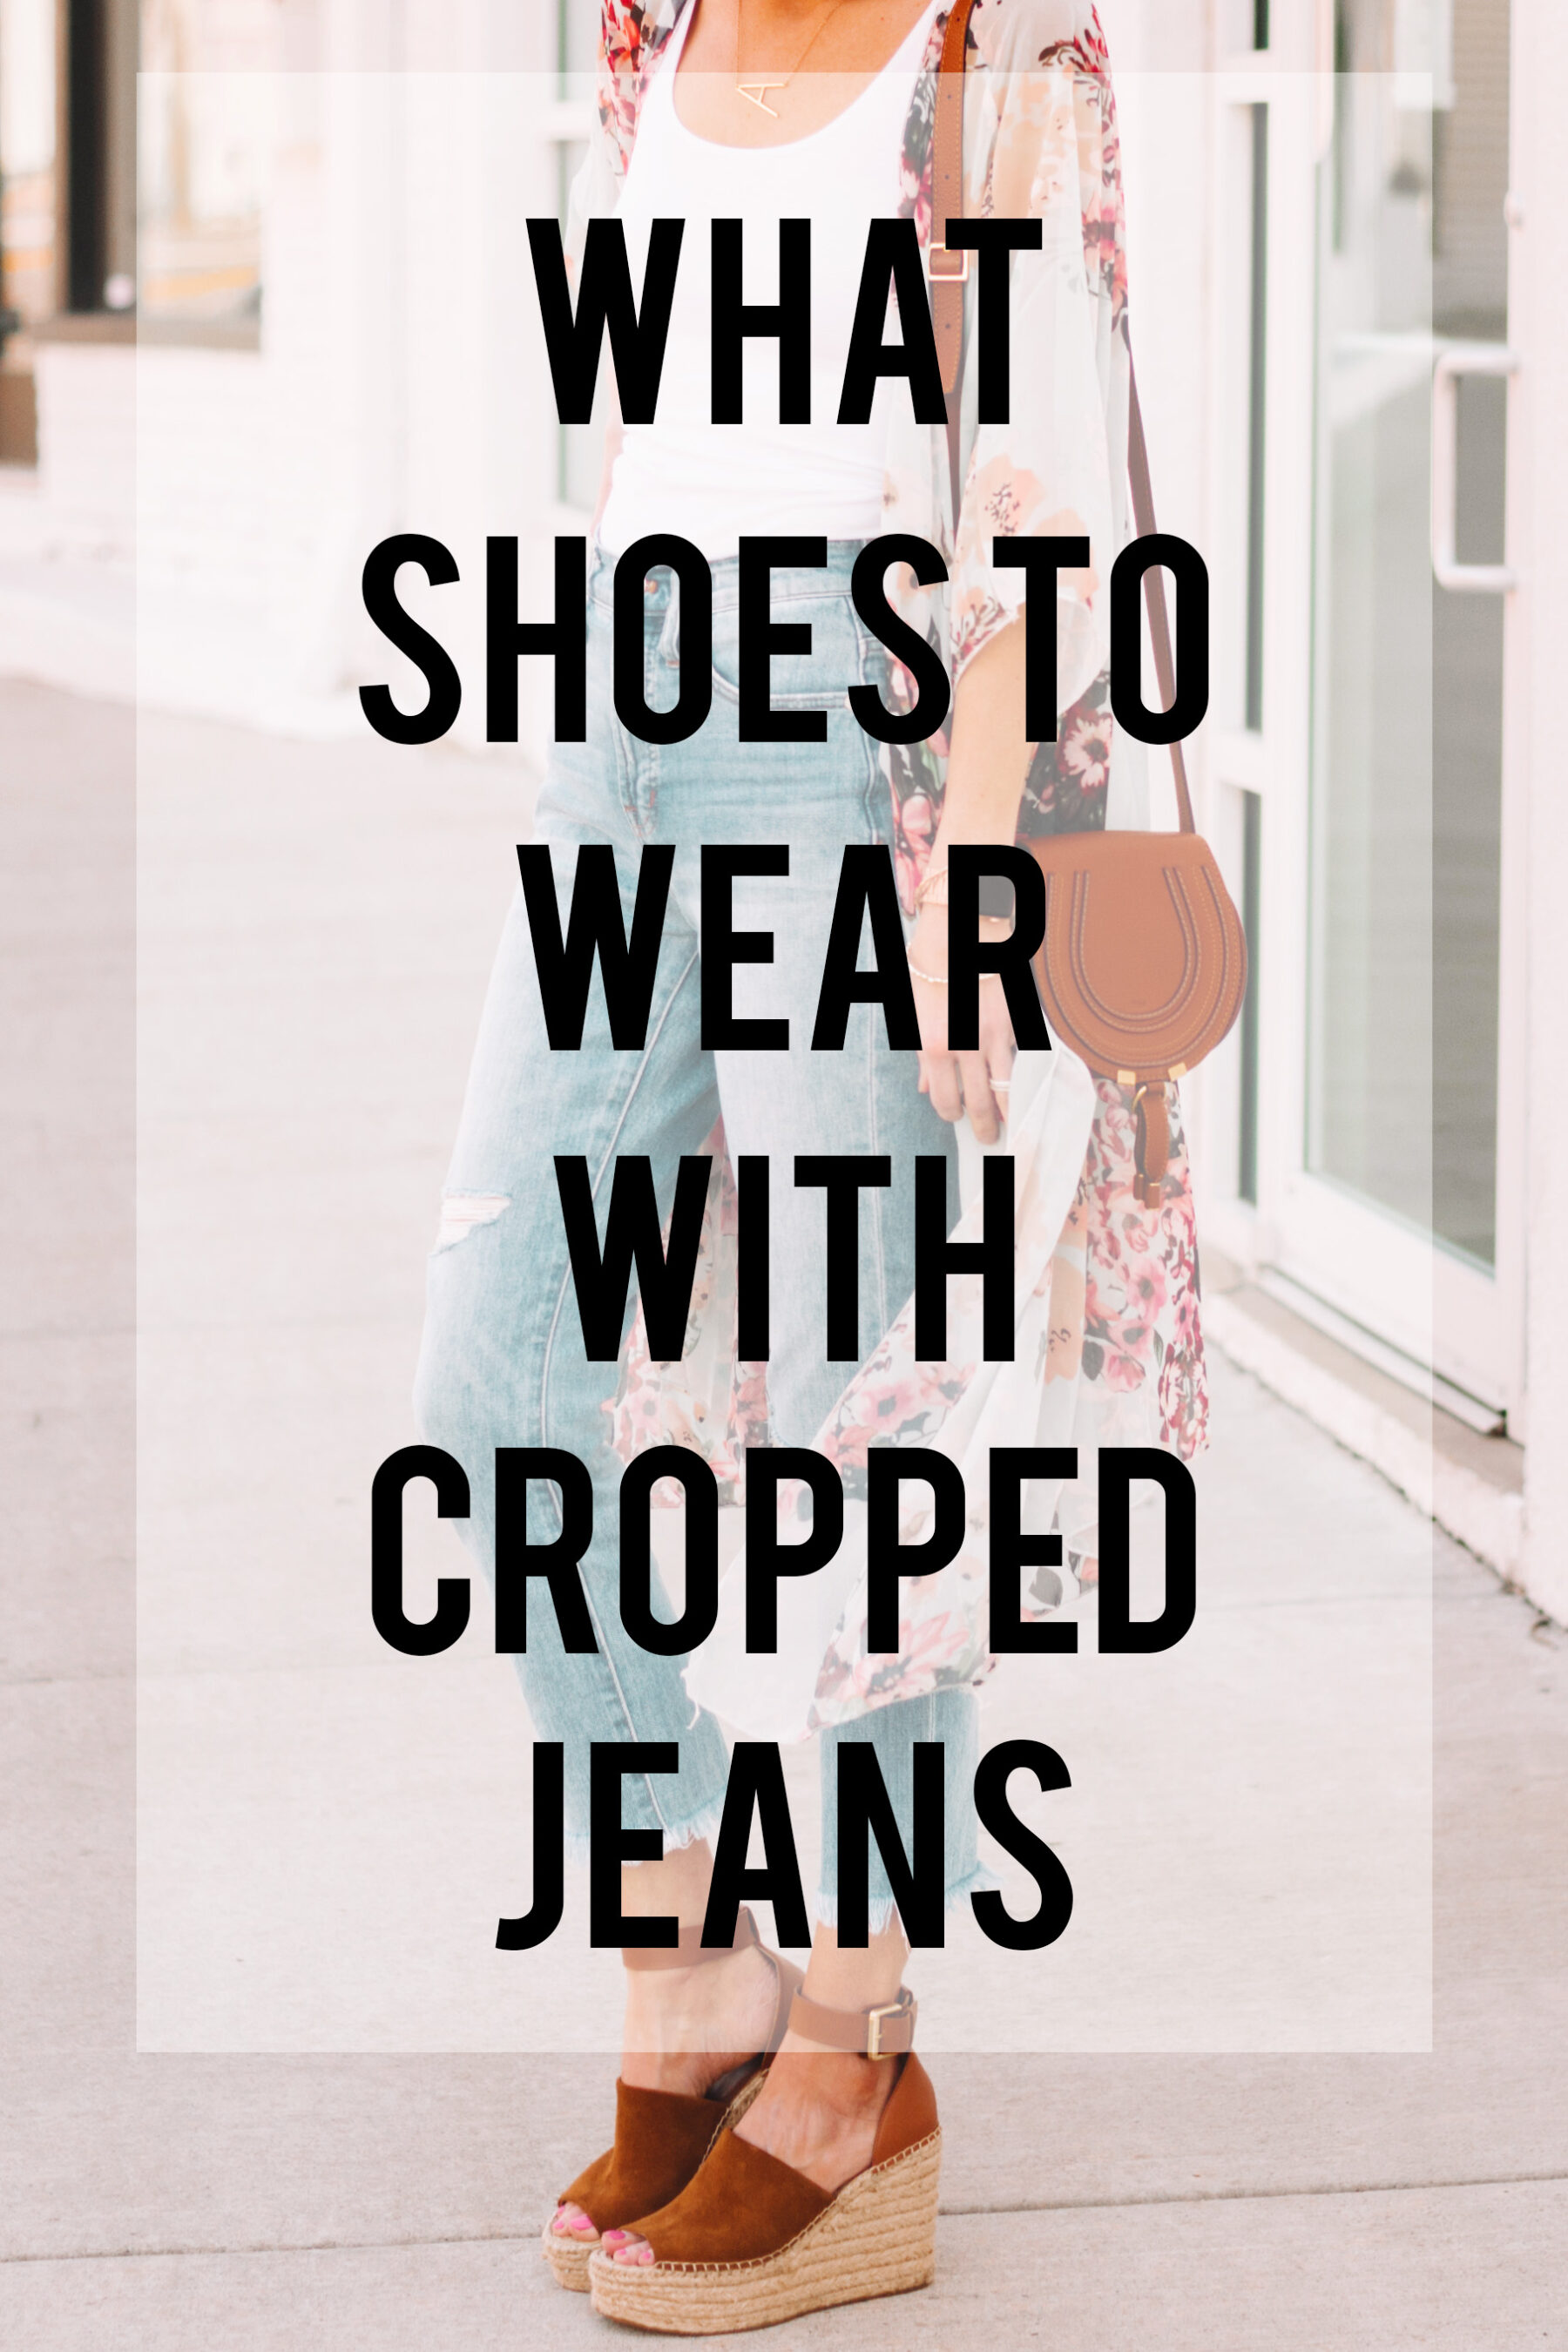 Best Shoes to Wear with Cropped Pants  Capri pants outfits, Cropped pants  outfit, Cropped pants